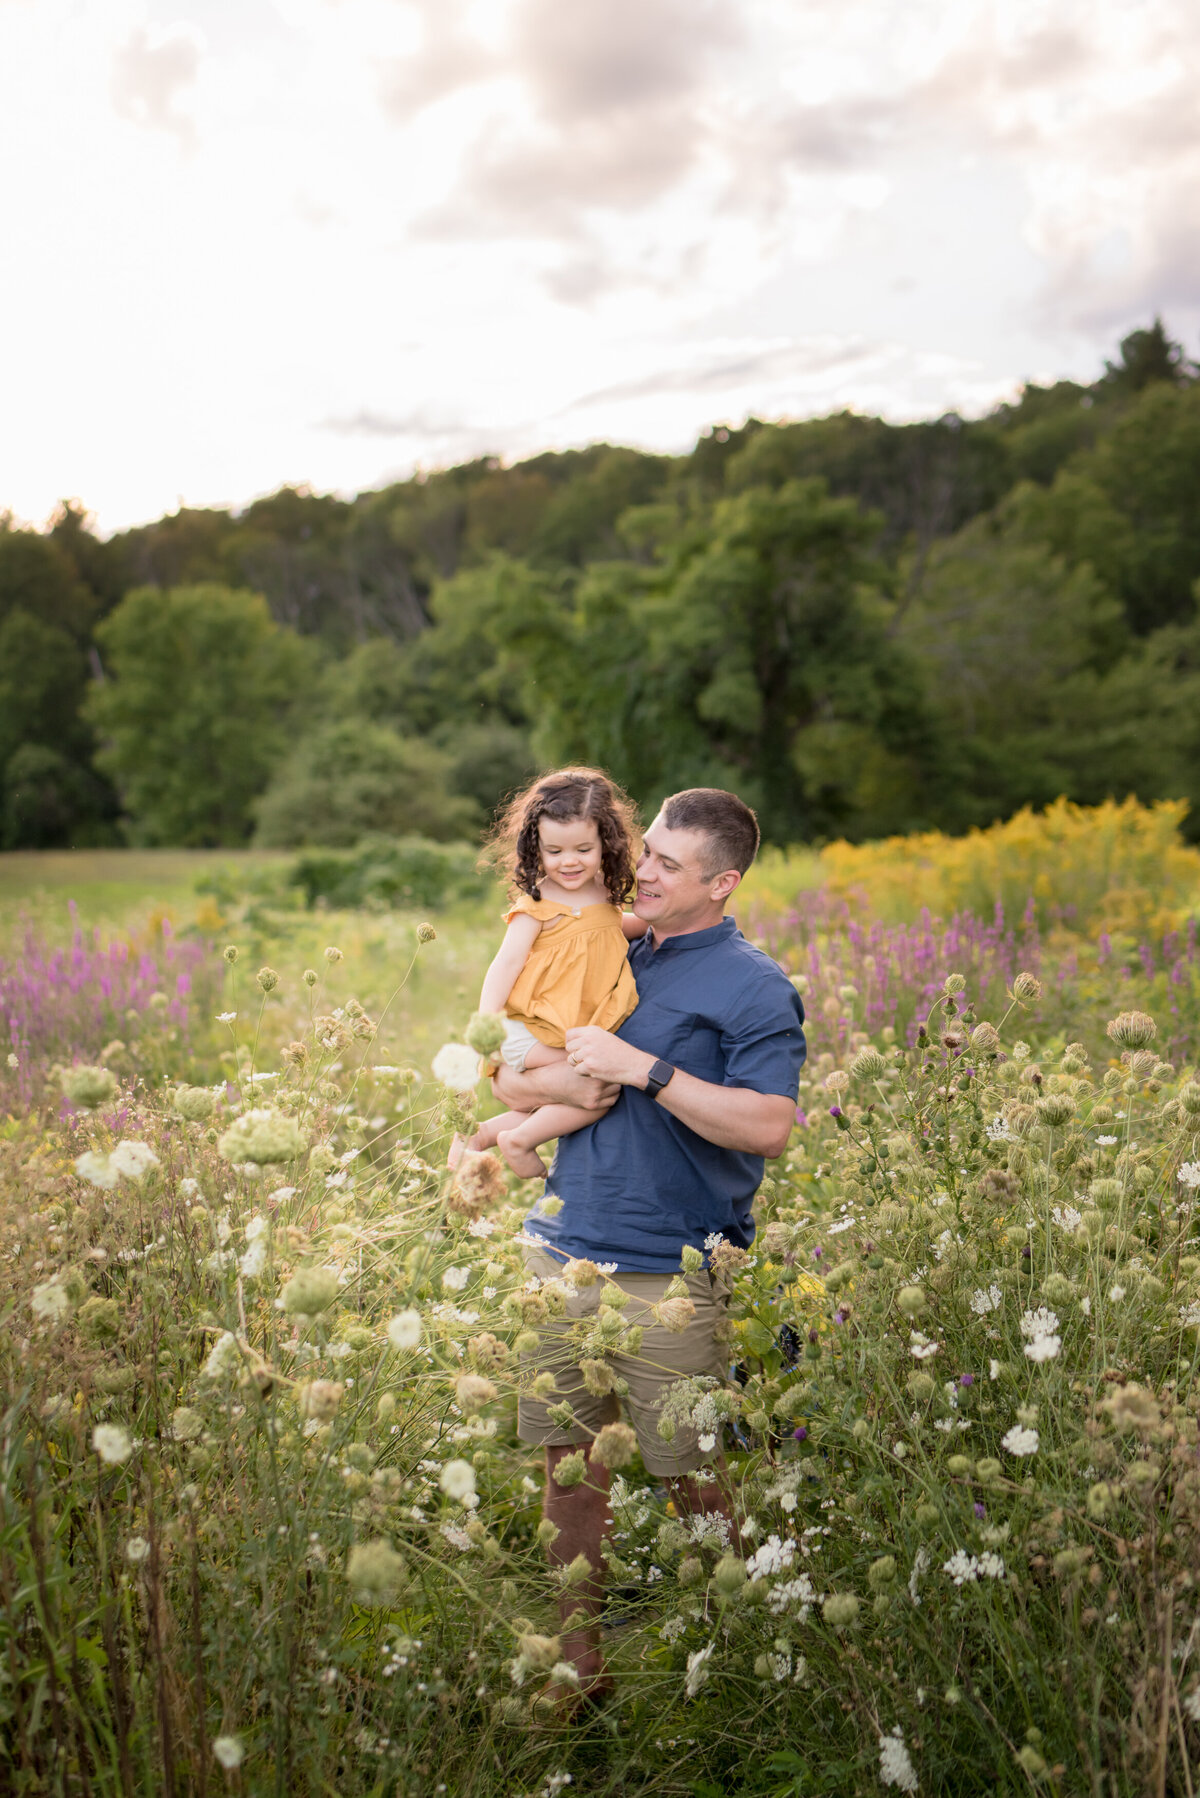 Boston-family-photographer-bella-wang-photography-Lifestyle-session-outdoor-wildflower-83